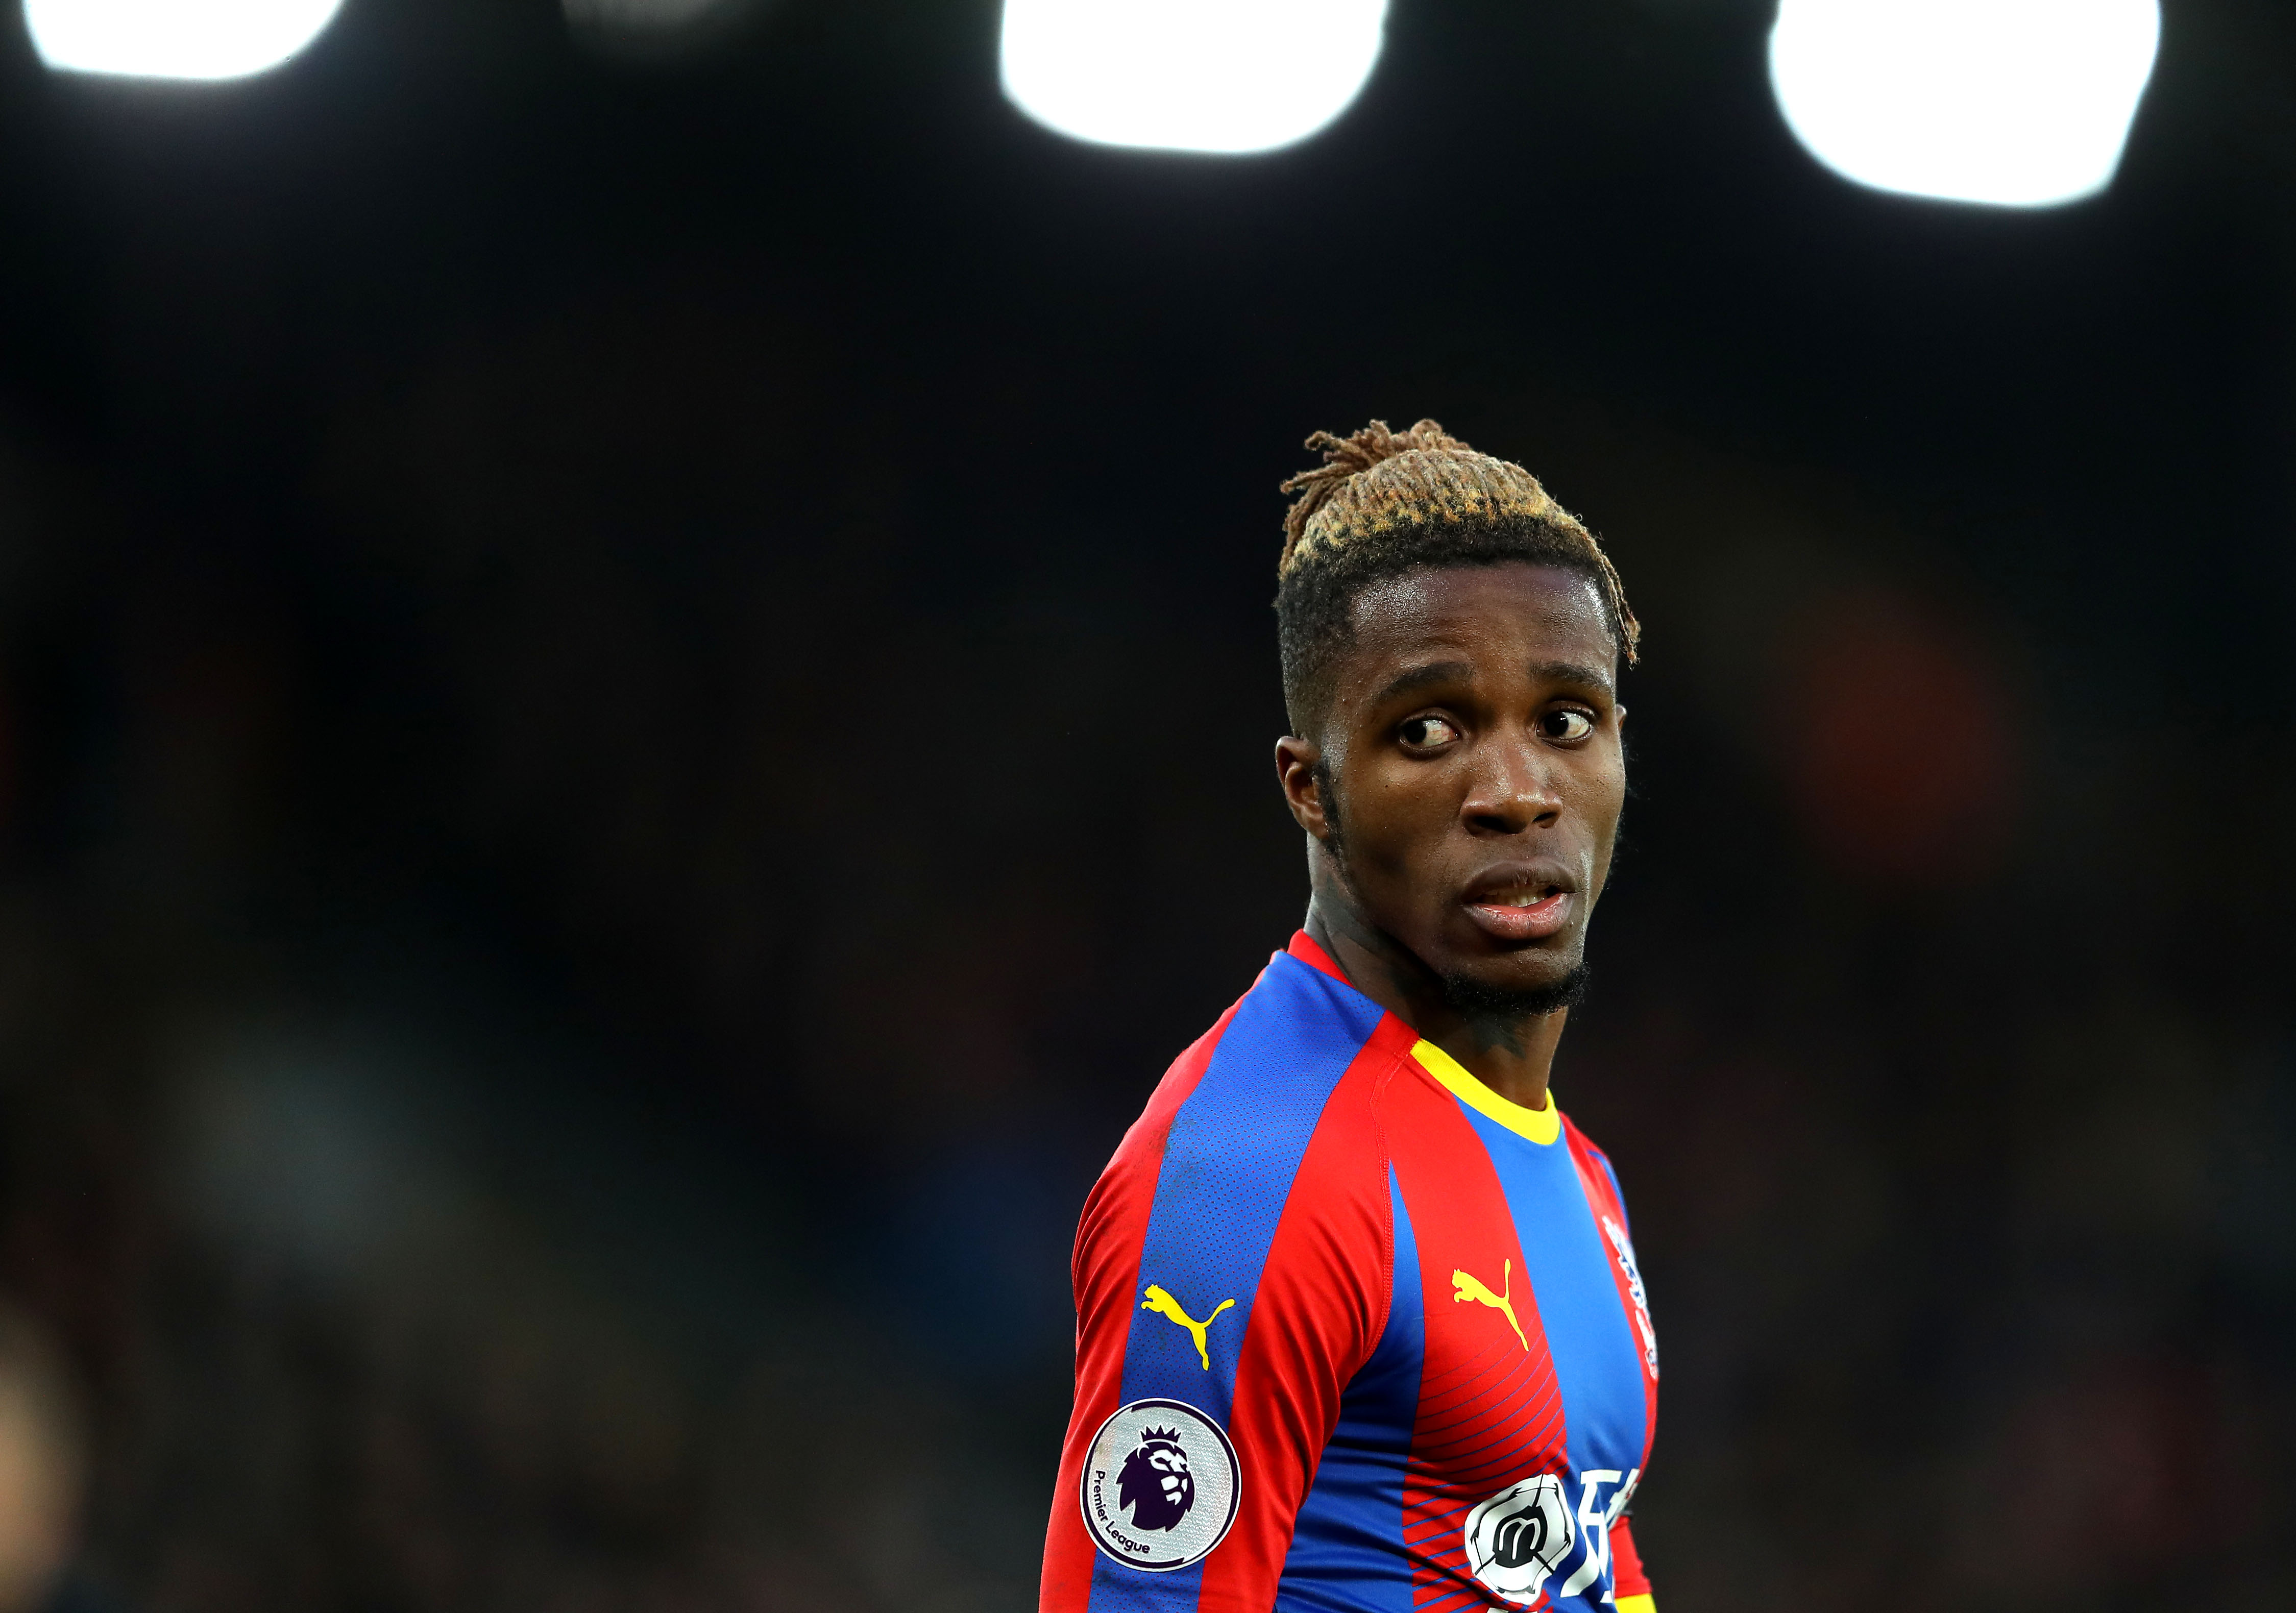 Wilfried Zaha is linked with move to Arsenal. (Photo courtesy: AFP/Getty)